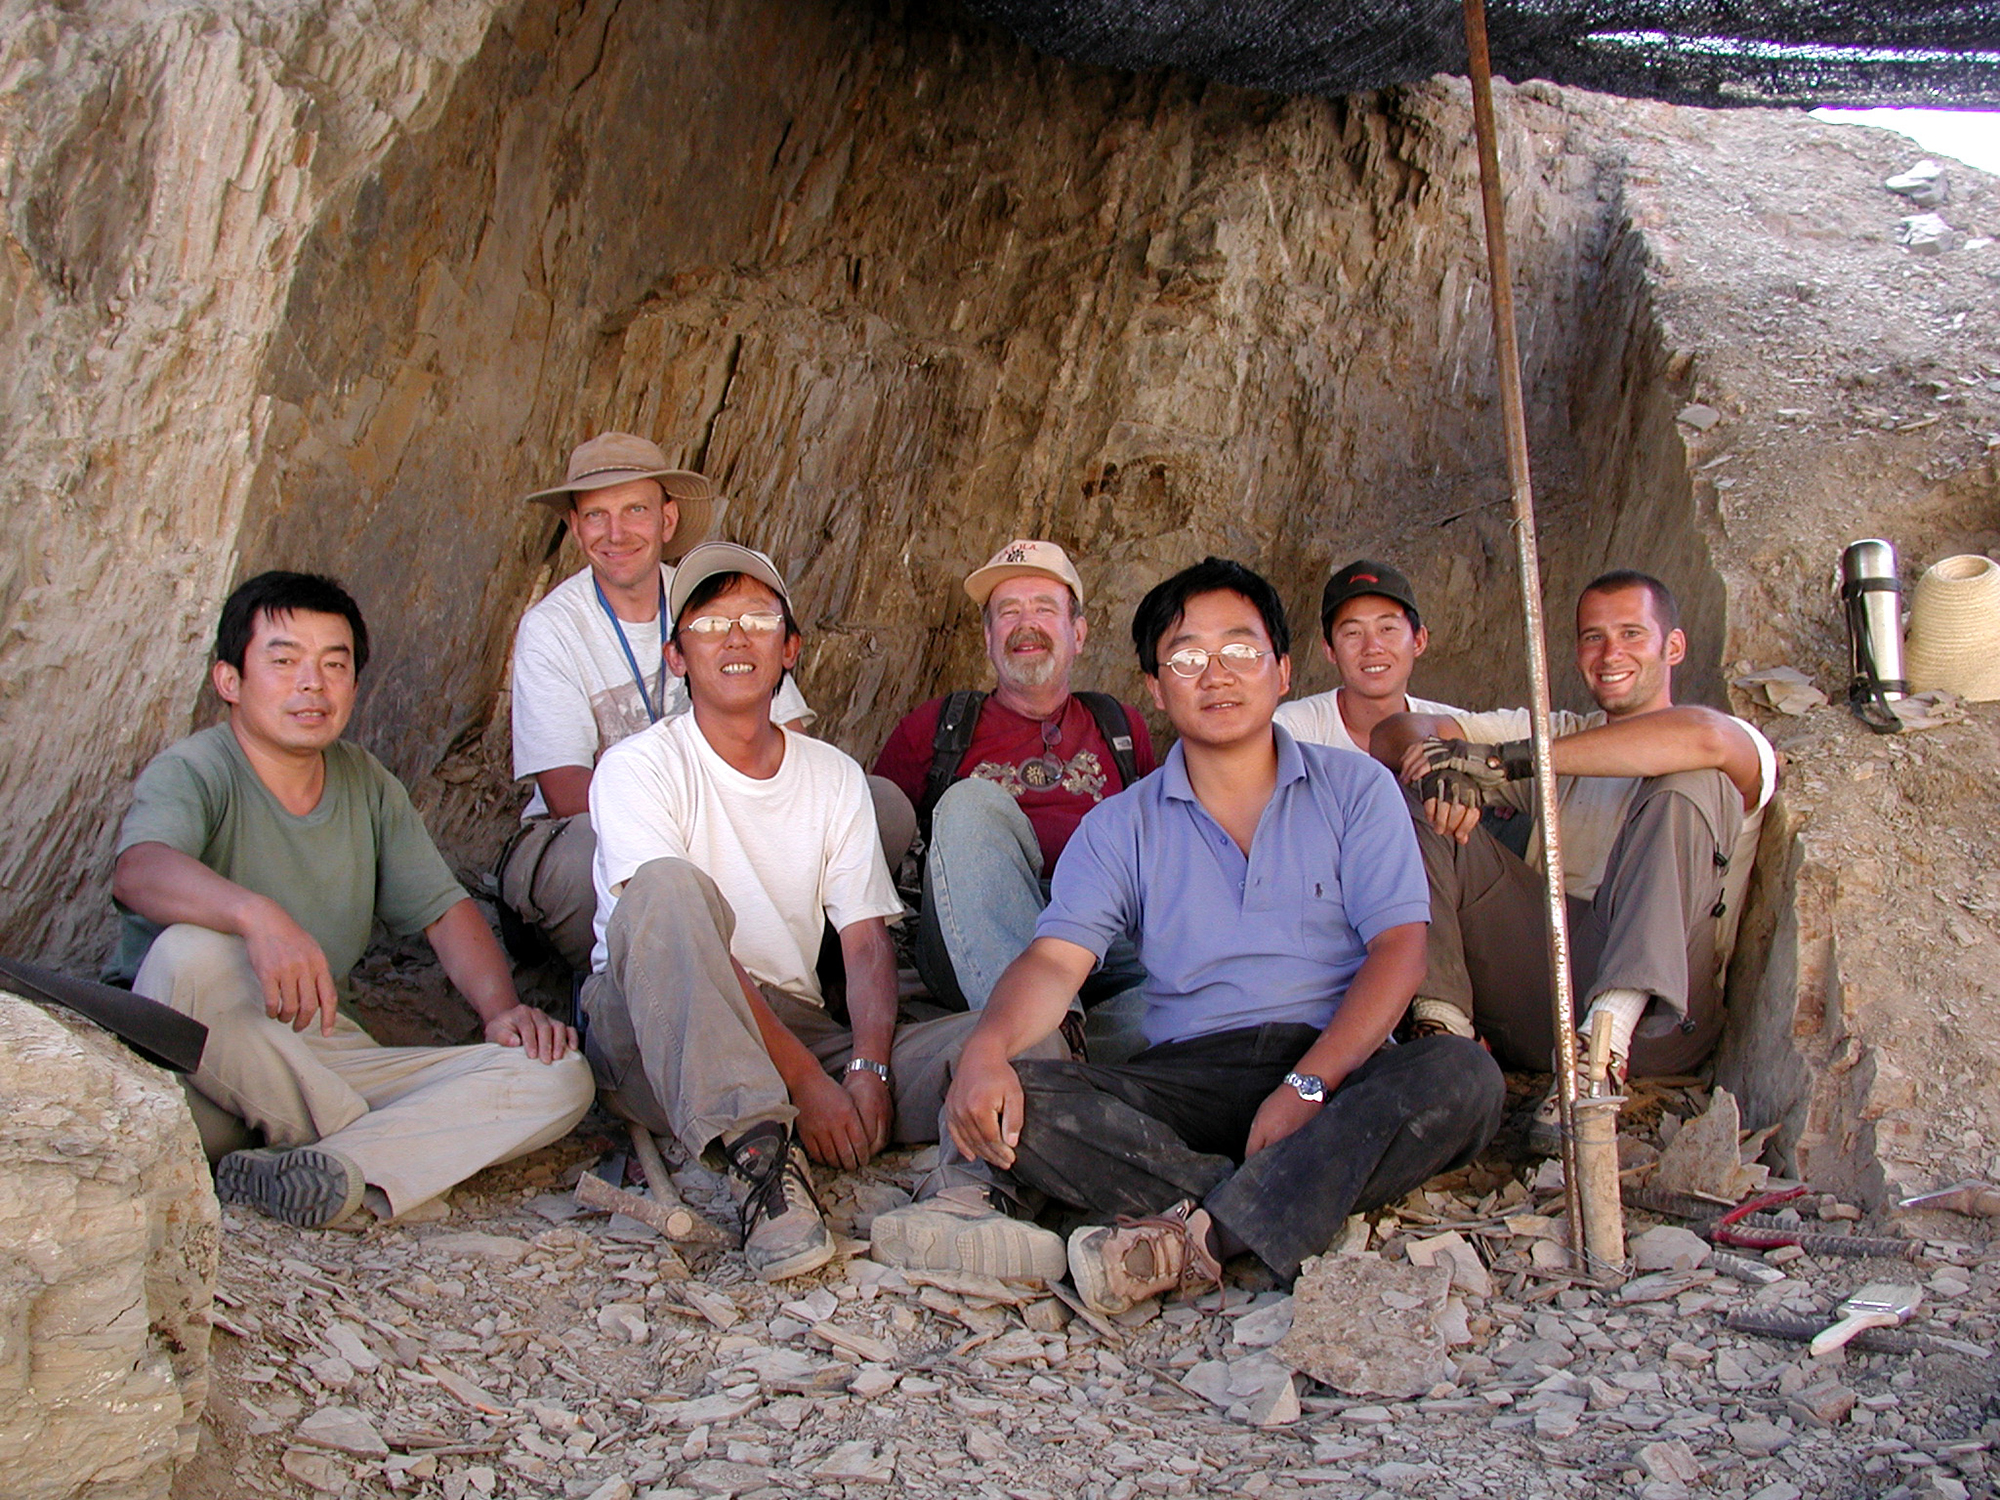 Seven people sitting in an excavation cave site looking towards the camera.